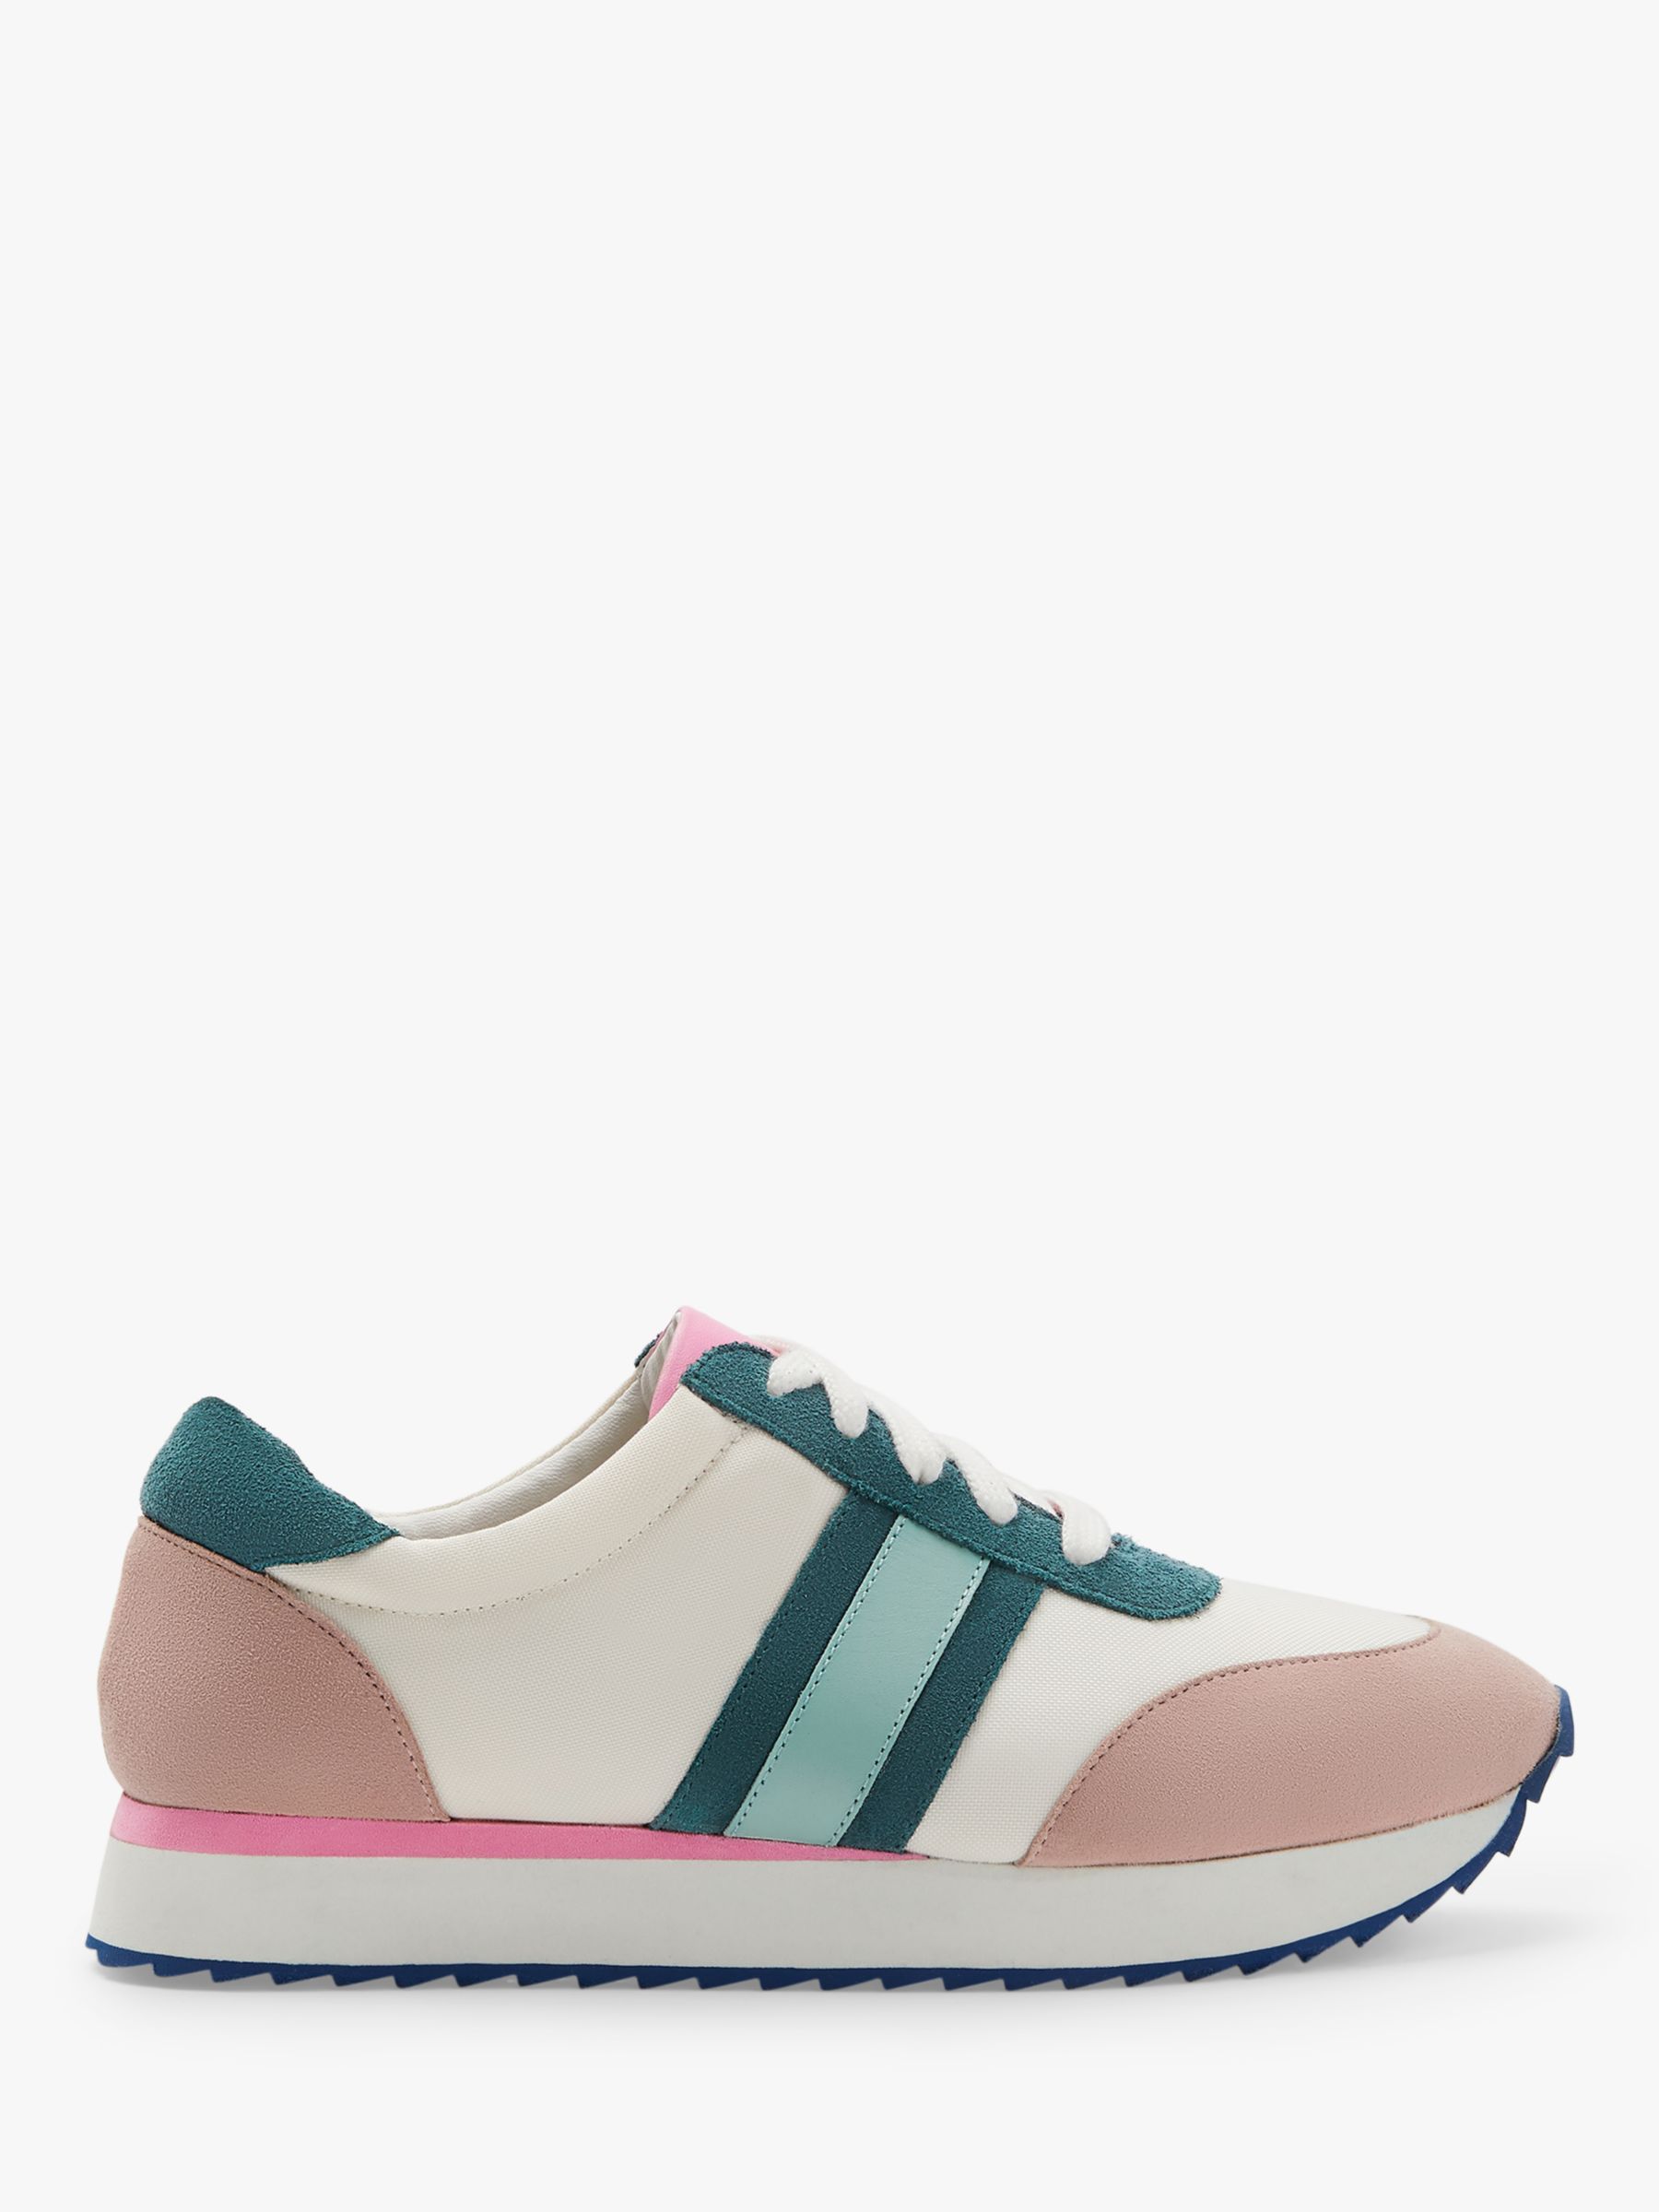 Boden May Eva Suede Trainers